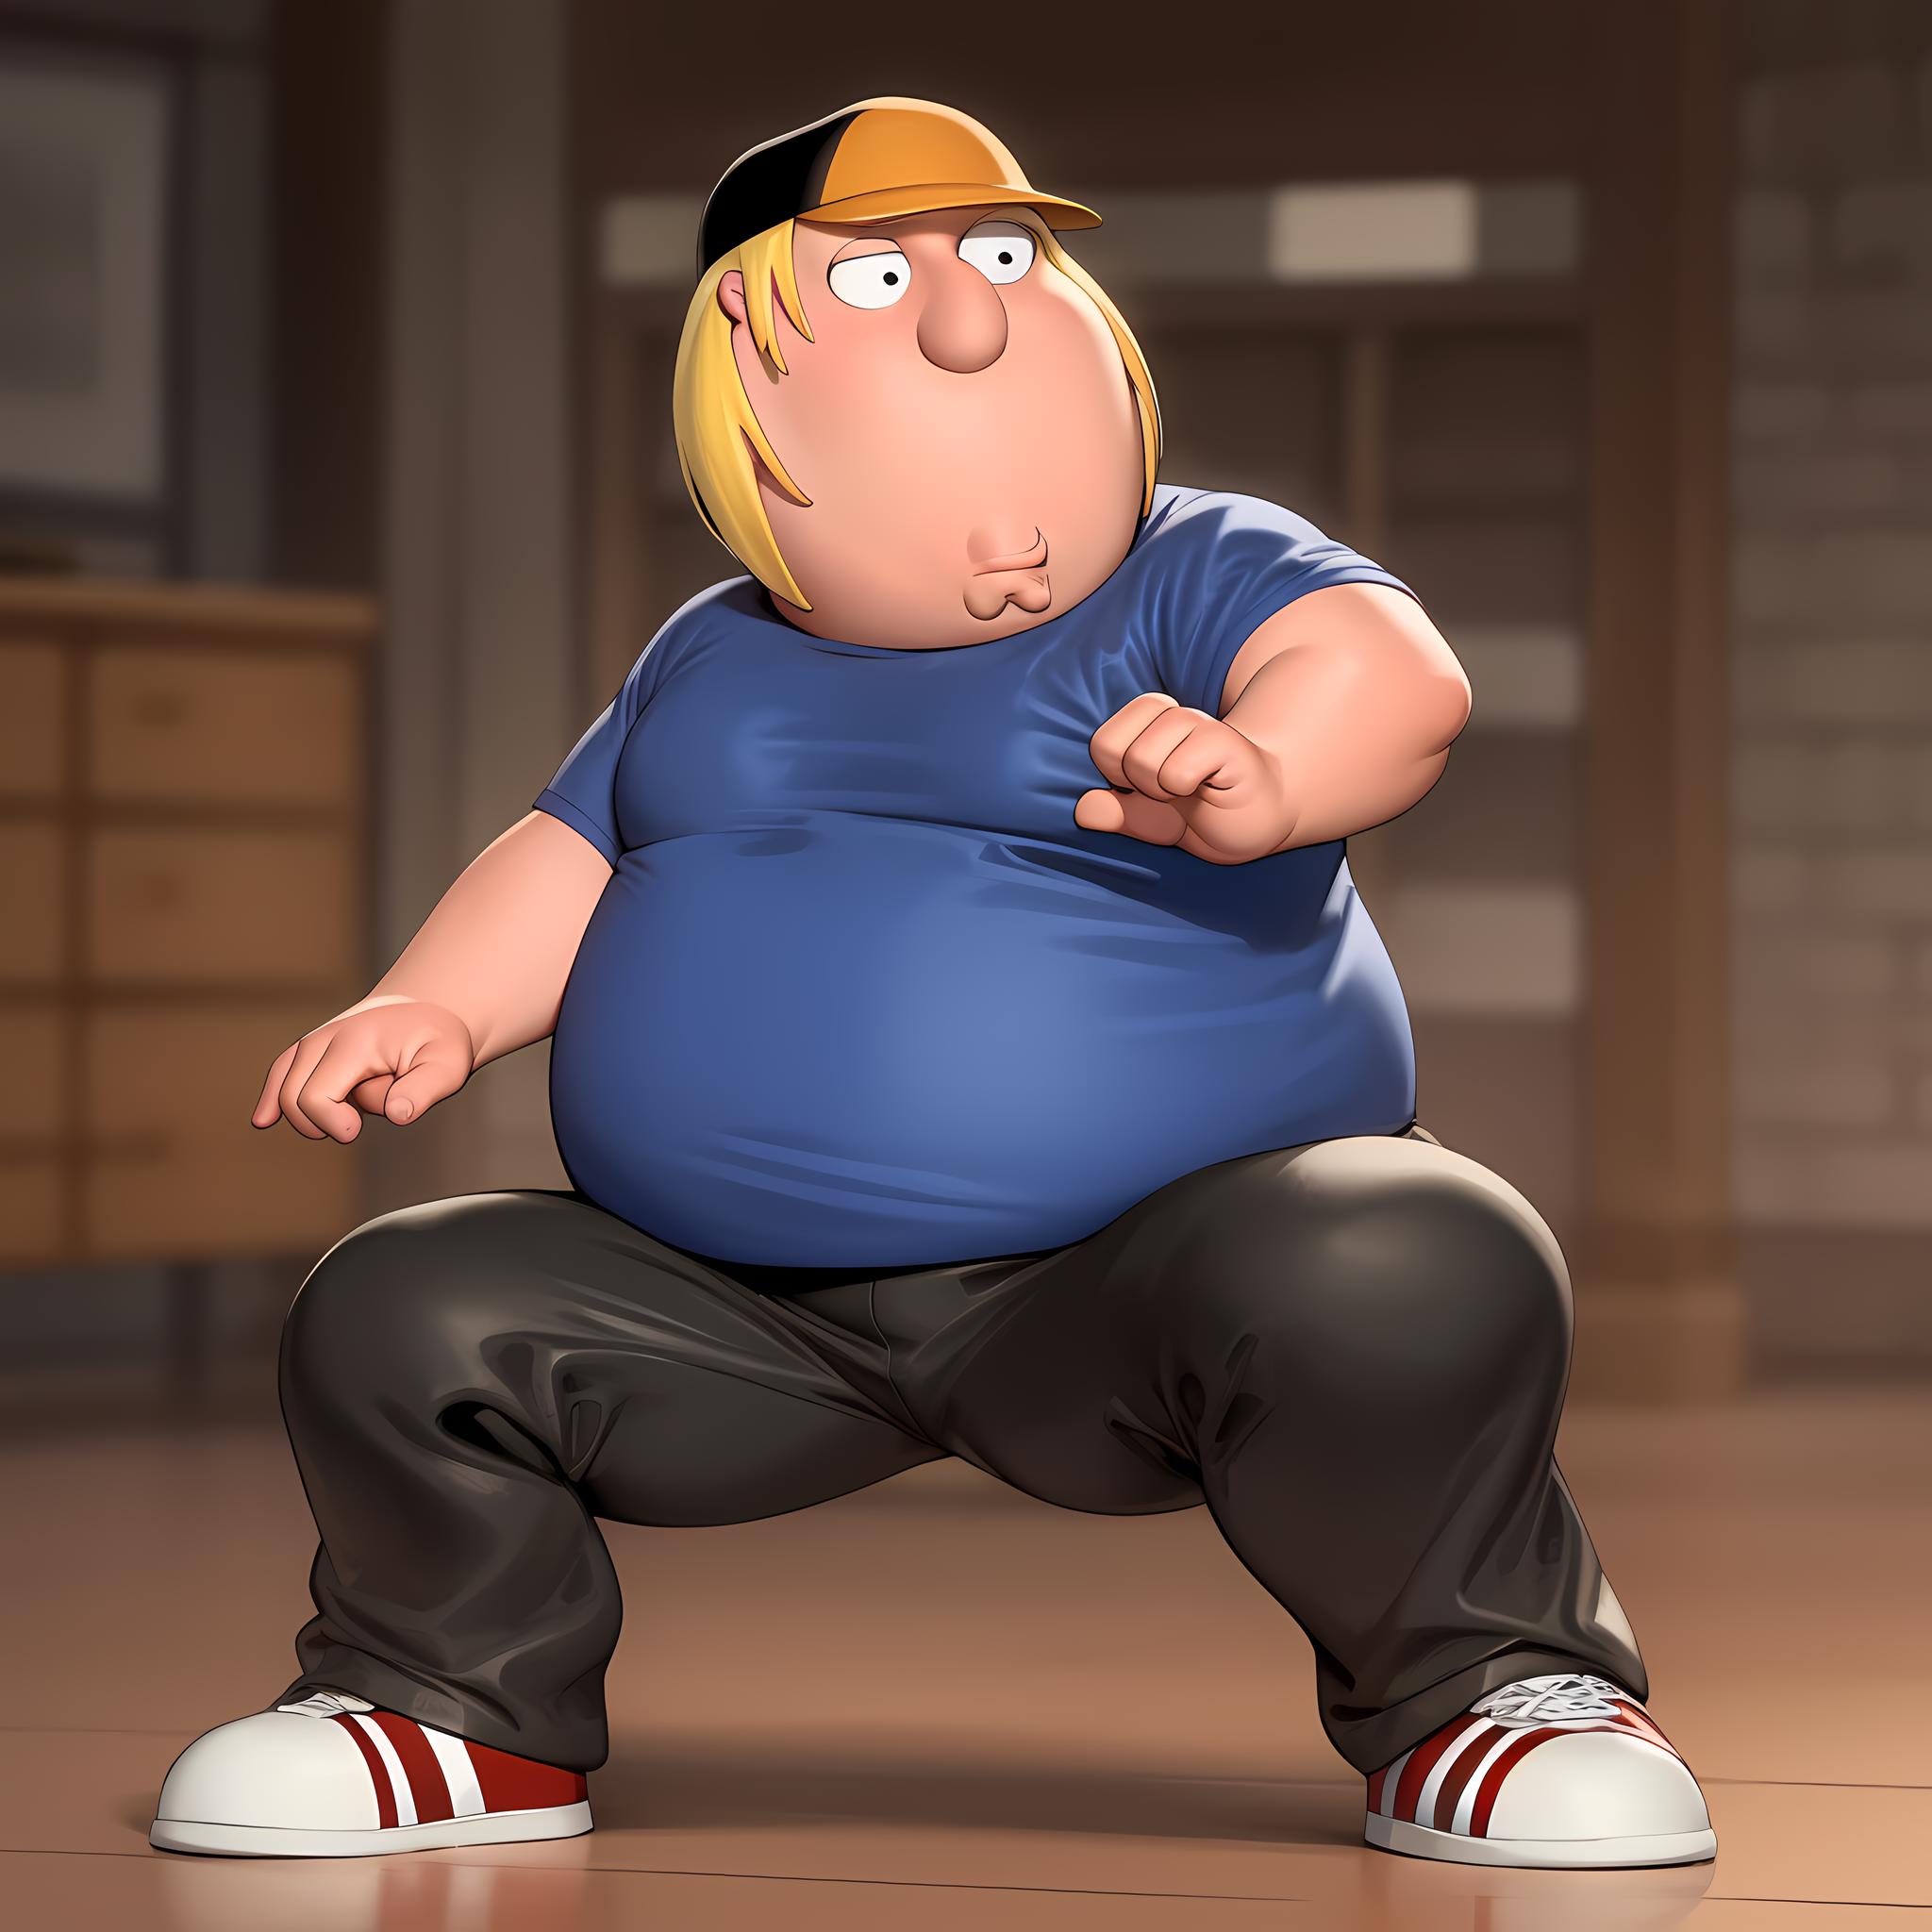 Chris Griffin image by TheGooder